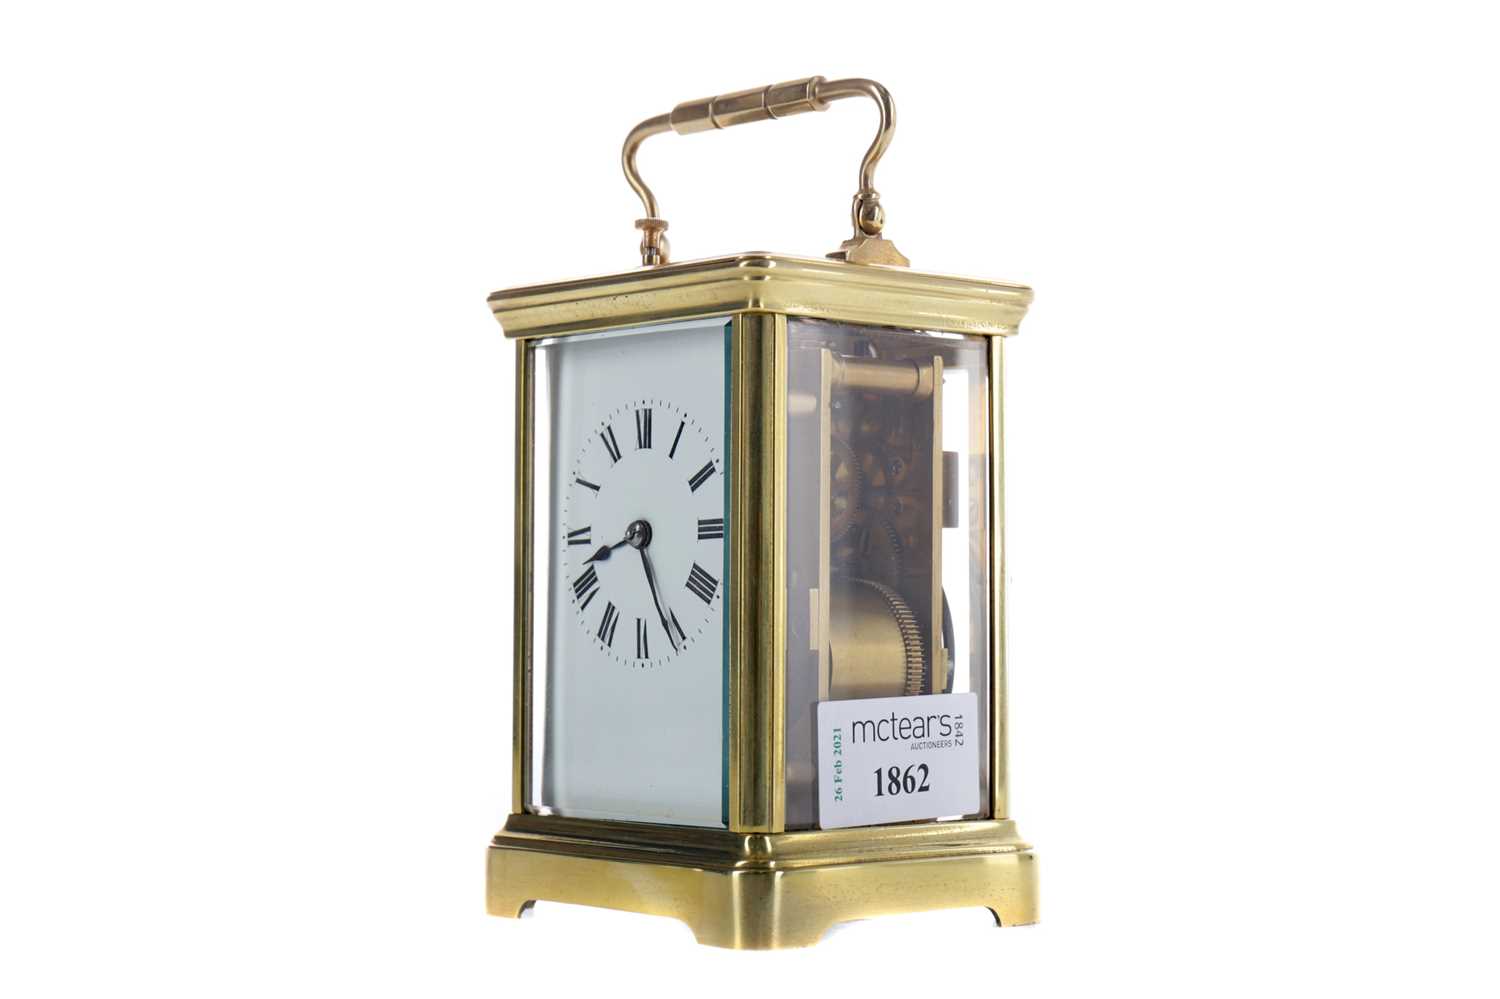 Lot 1862 - AN EARLY 20TH CENTURY REPEATER CARRIAGE CLOCK